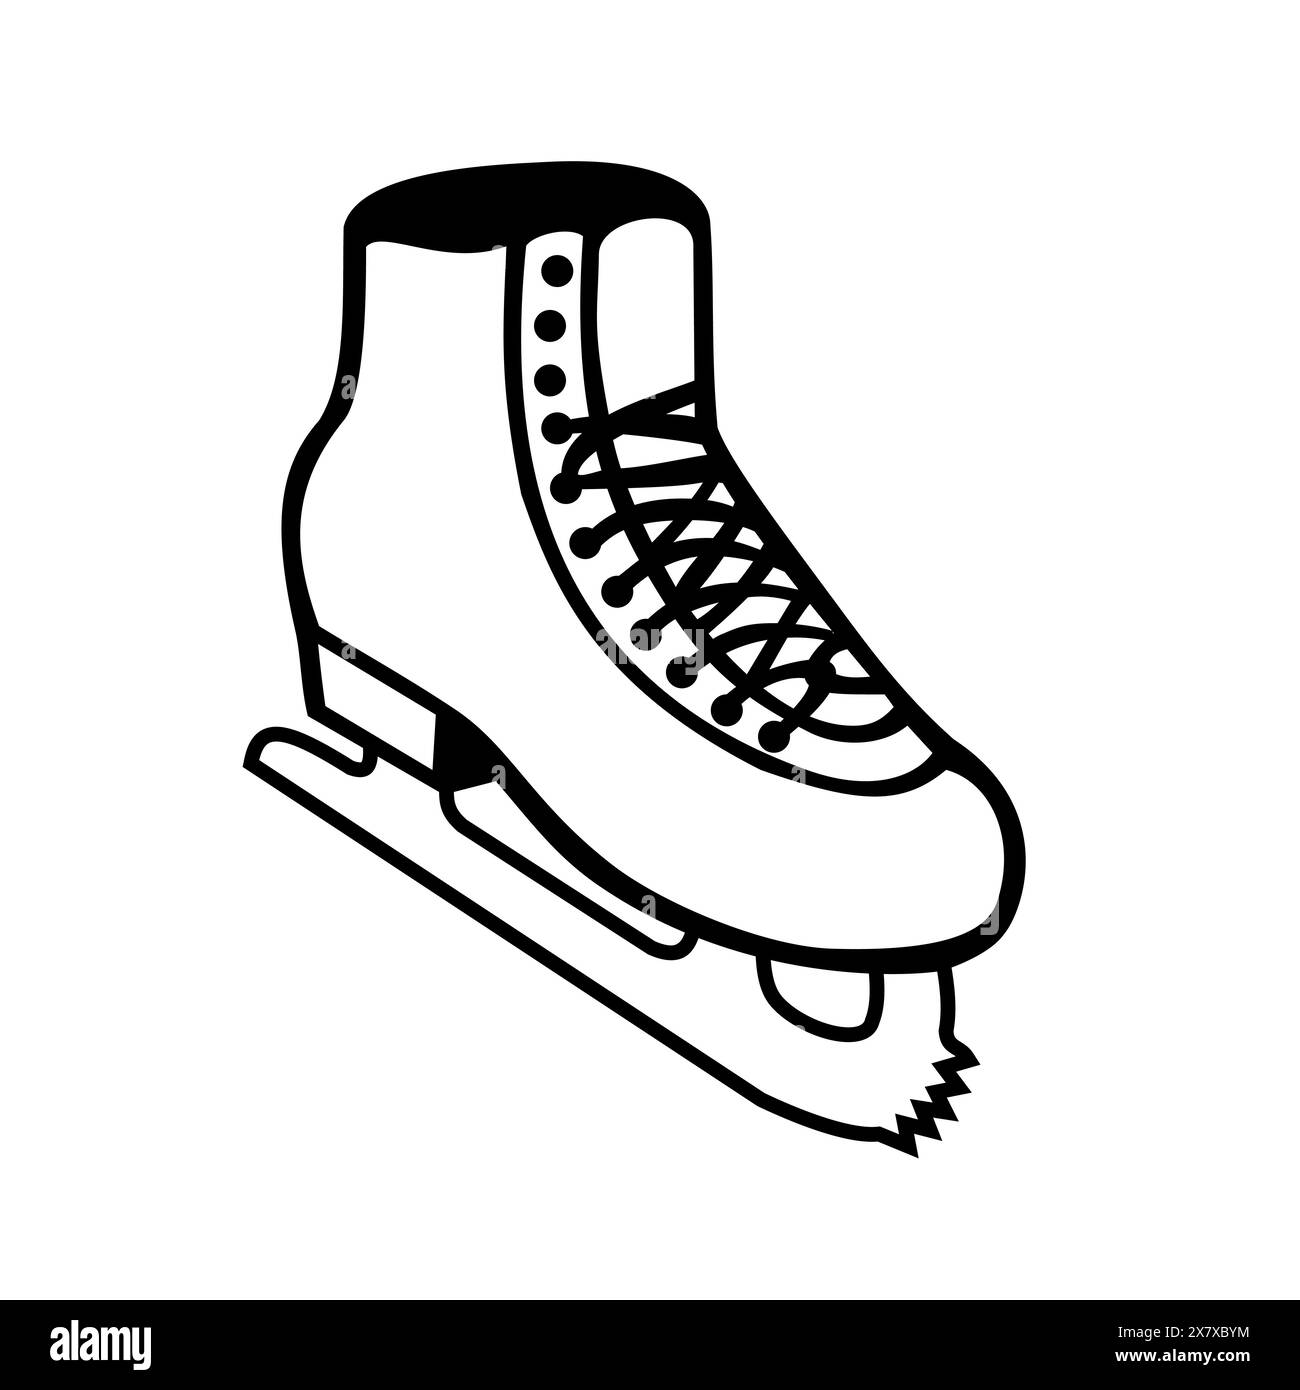 Retro style illustration of Ice skates or ice skating shoes boots with blades viewed from side on isolated background done in cartoon black and white. Stock Vector